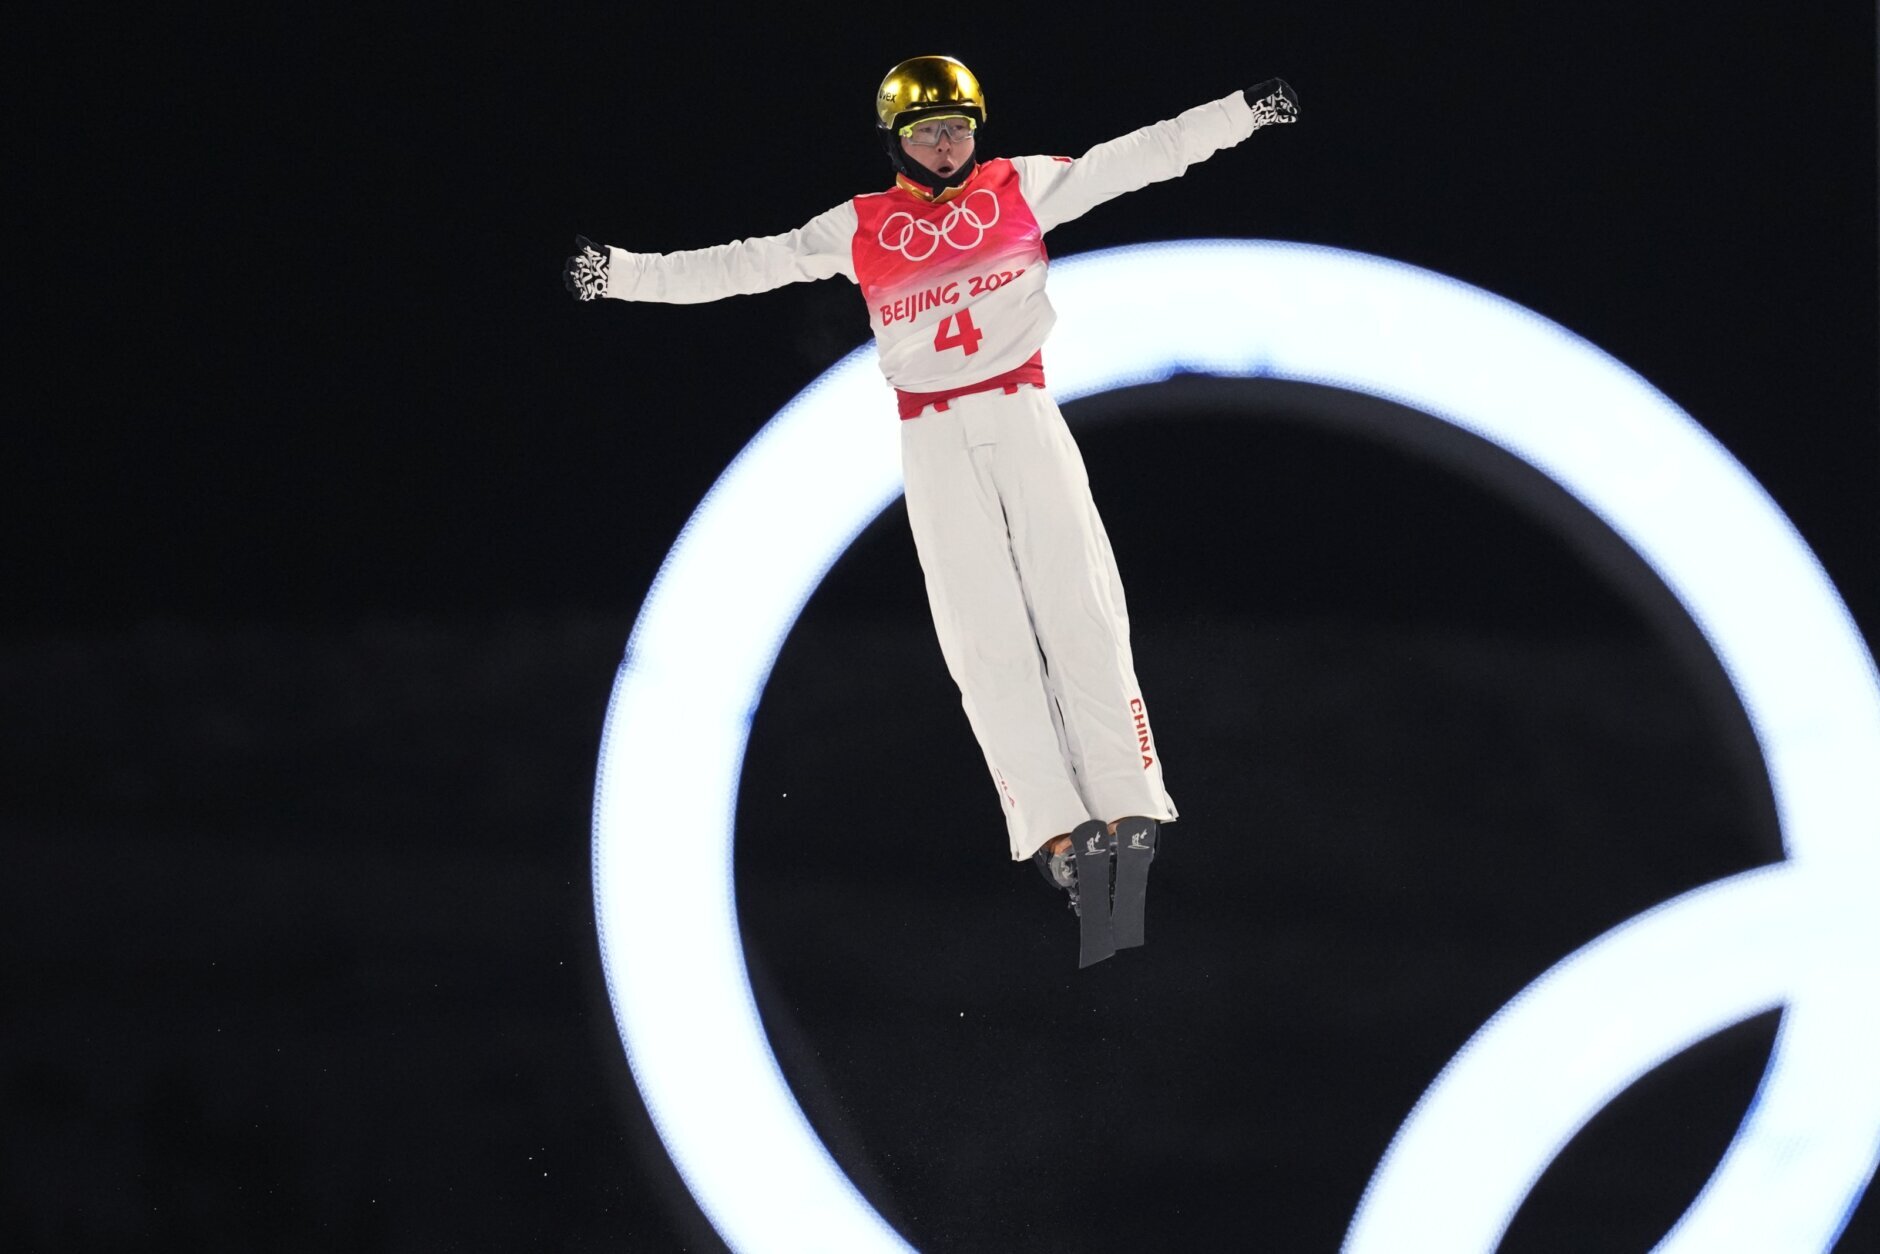 <p>China&#8217;s Qi Guangpu competes during the men&#8217;s aerials qualification at the 2022 Winter Olympics, Tuesday, Feb. 15, 2022, in Zhangjiakou, China.</p>
